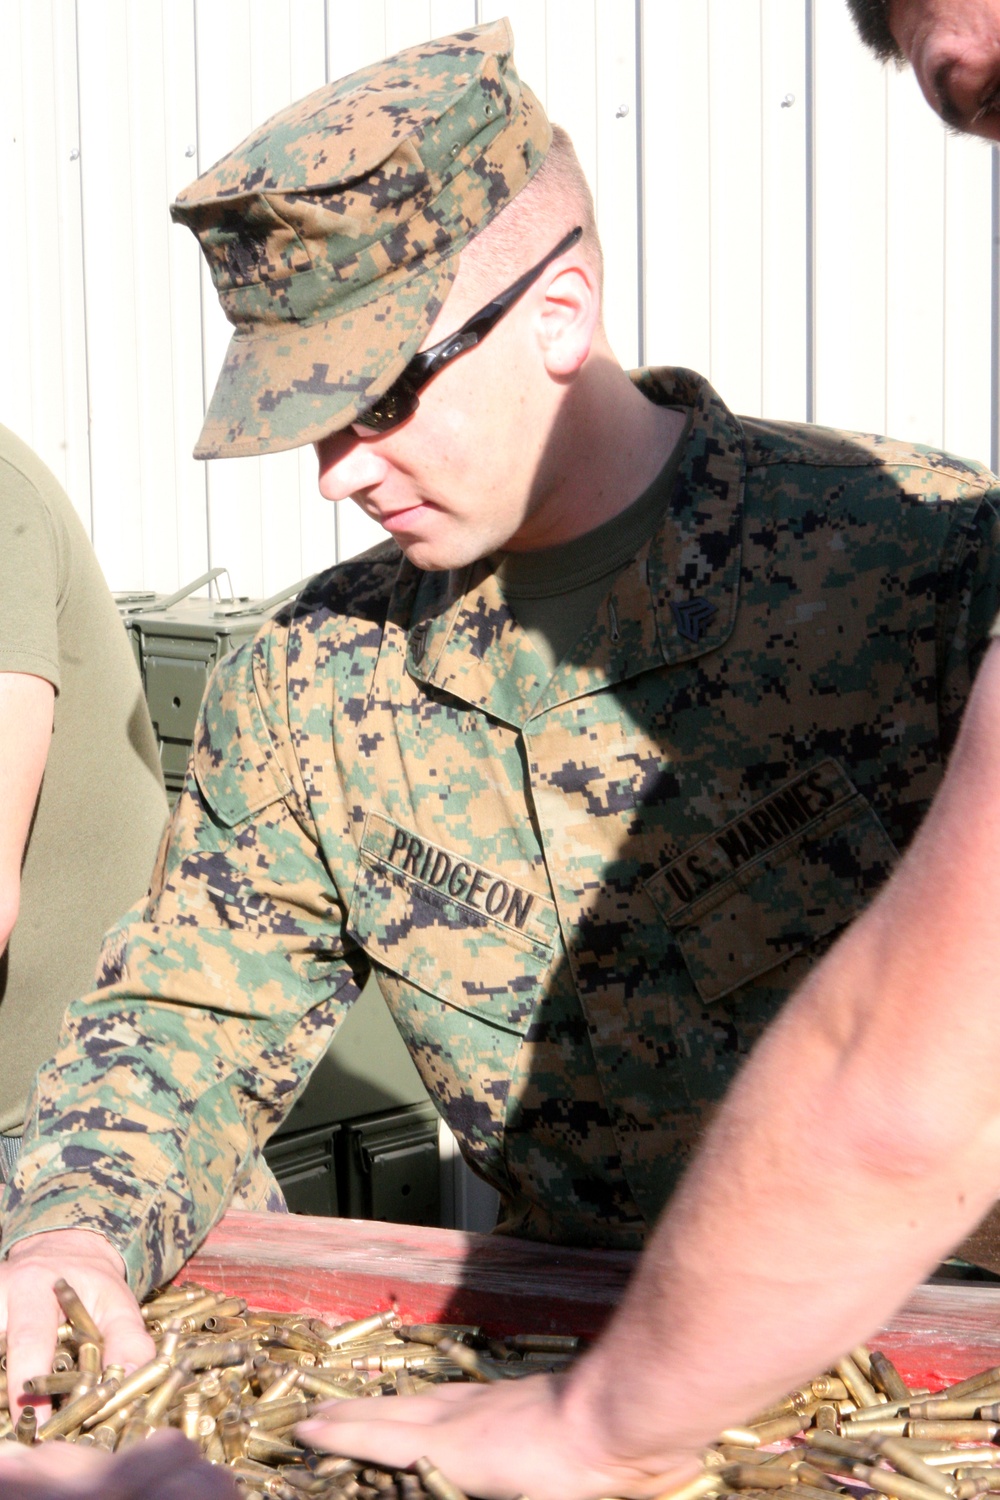 Punch, shoot, dive: Marine teaches with passion